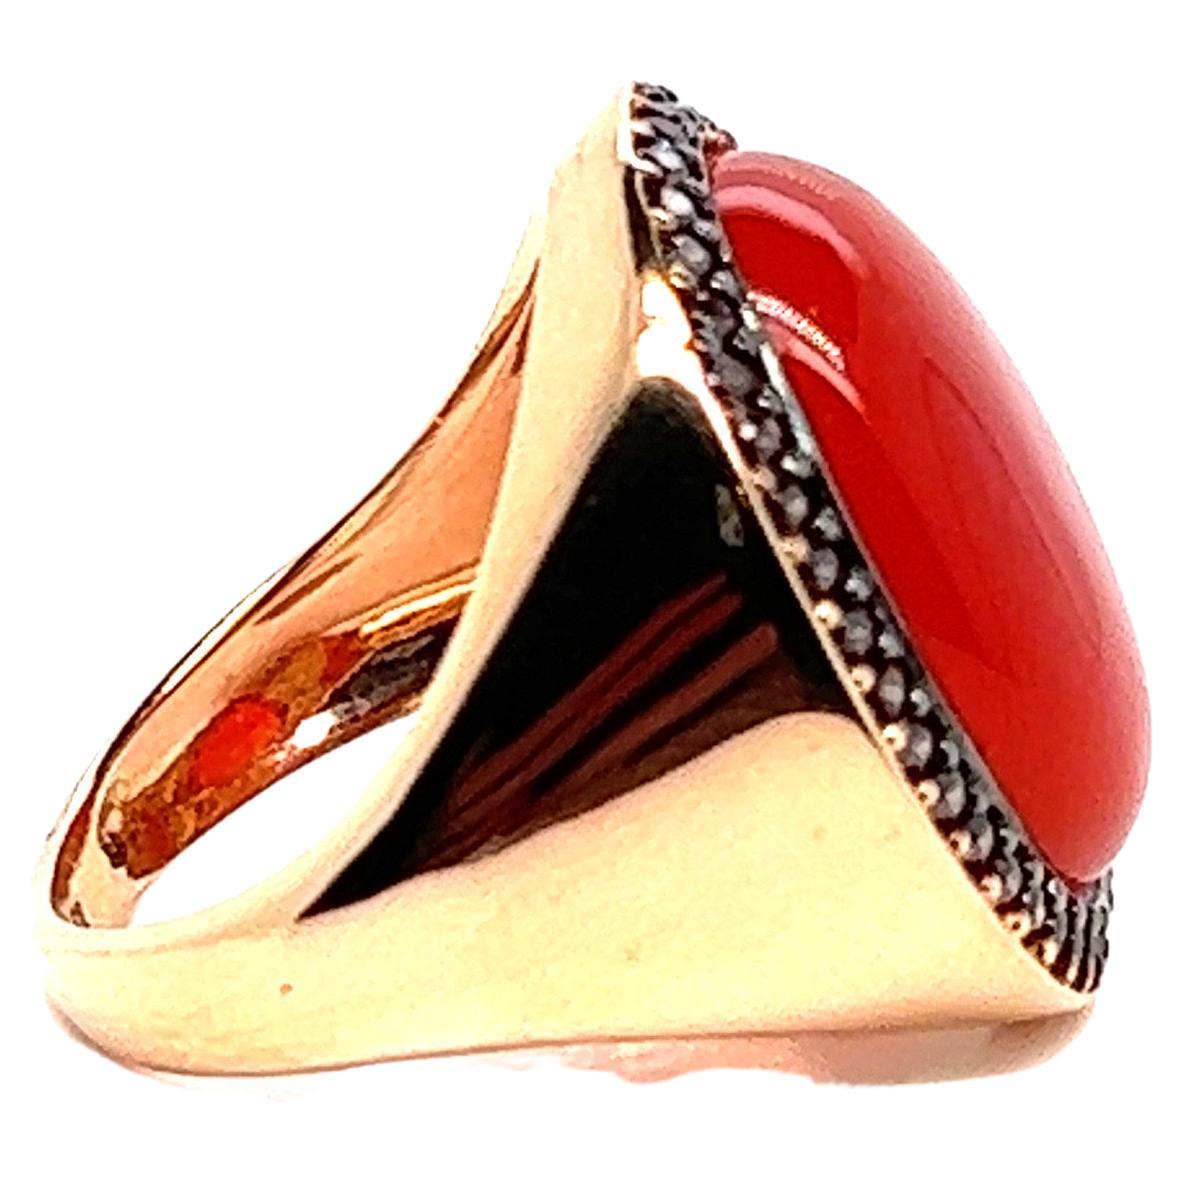 Discover this magnificent signet ring in 18-carat pink gold, featuring a superb cabochon of red onyx, topped with a dazzling brown zirconia. This French ring is a true masterpiece of craftsmanship, combining elegance and timeless style.

The red